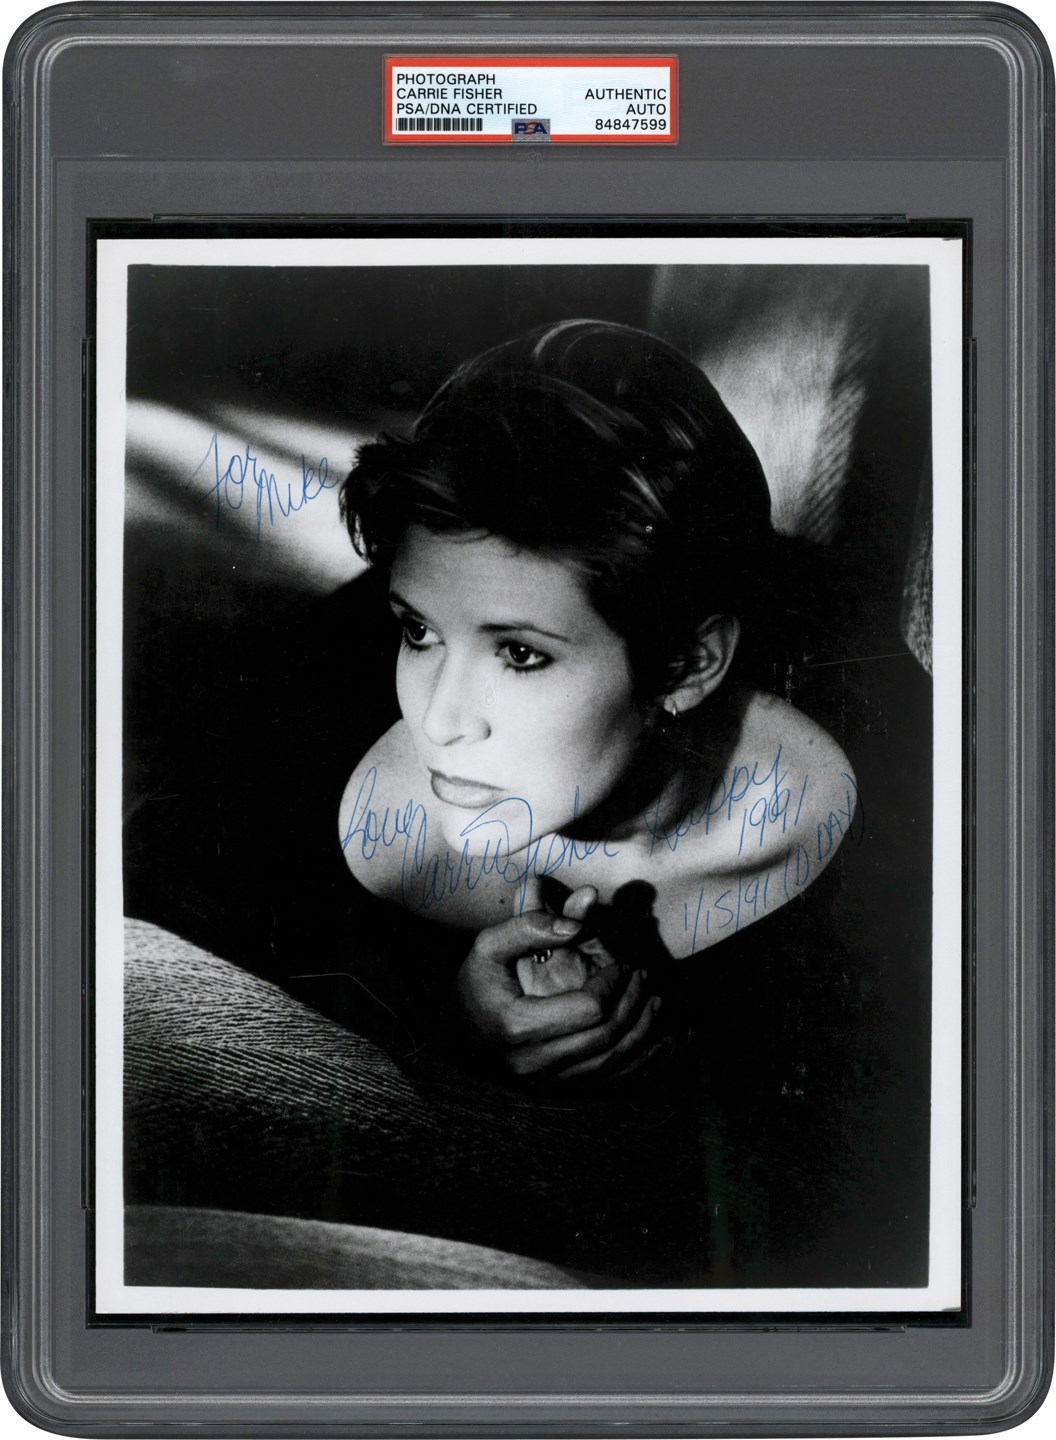 Rock And Pop Culture - Carrie Fisher Signed "Happy D-Day" Photograph (PSA)